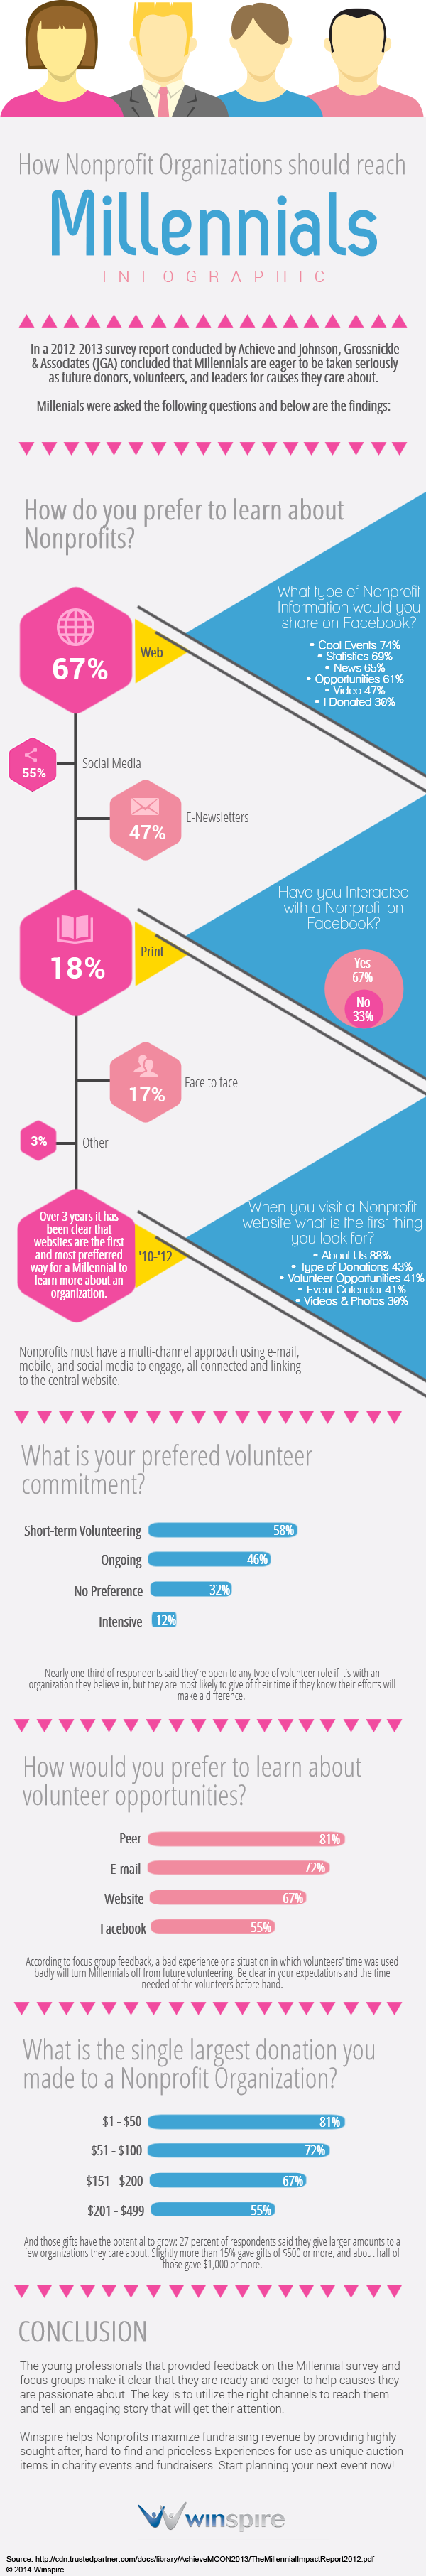 Winspire-Donor-Relations-Infographic-revised